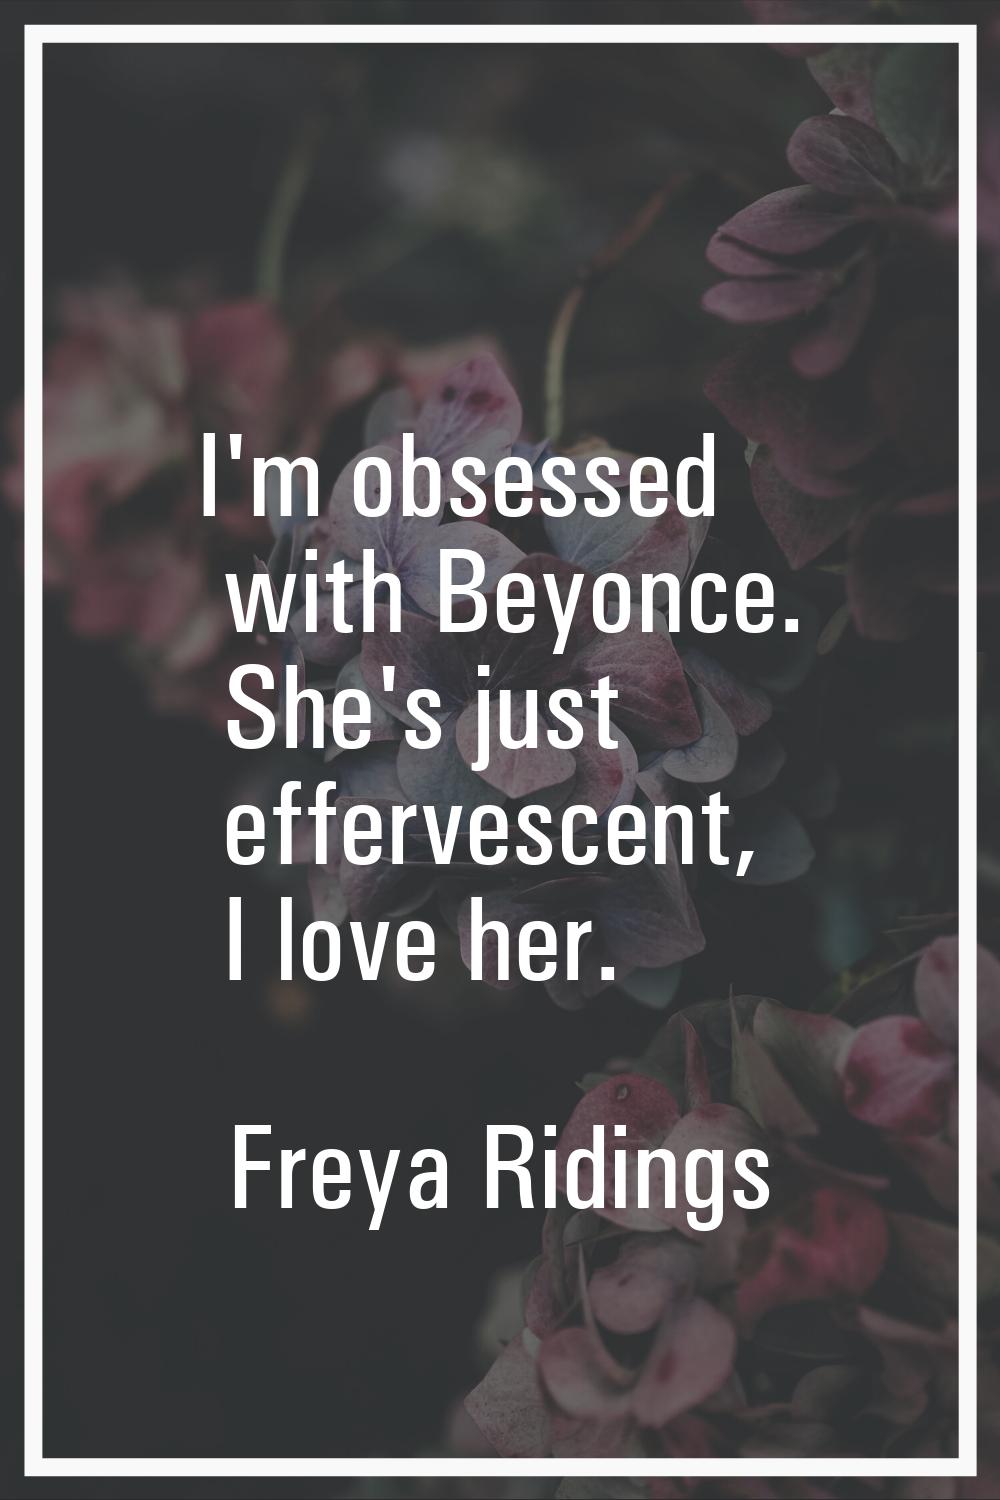 I'm obsessed with Beyonce. She's just effervescent, I love her.